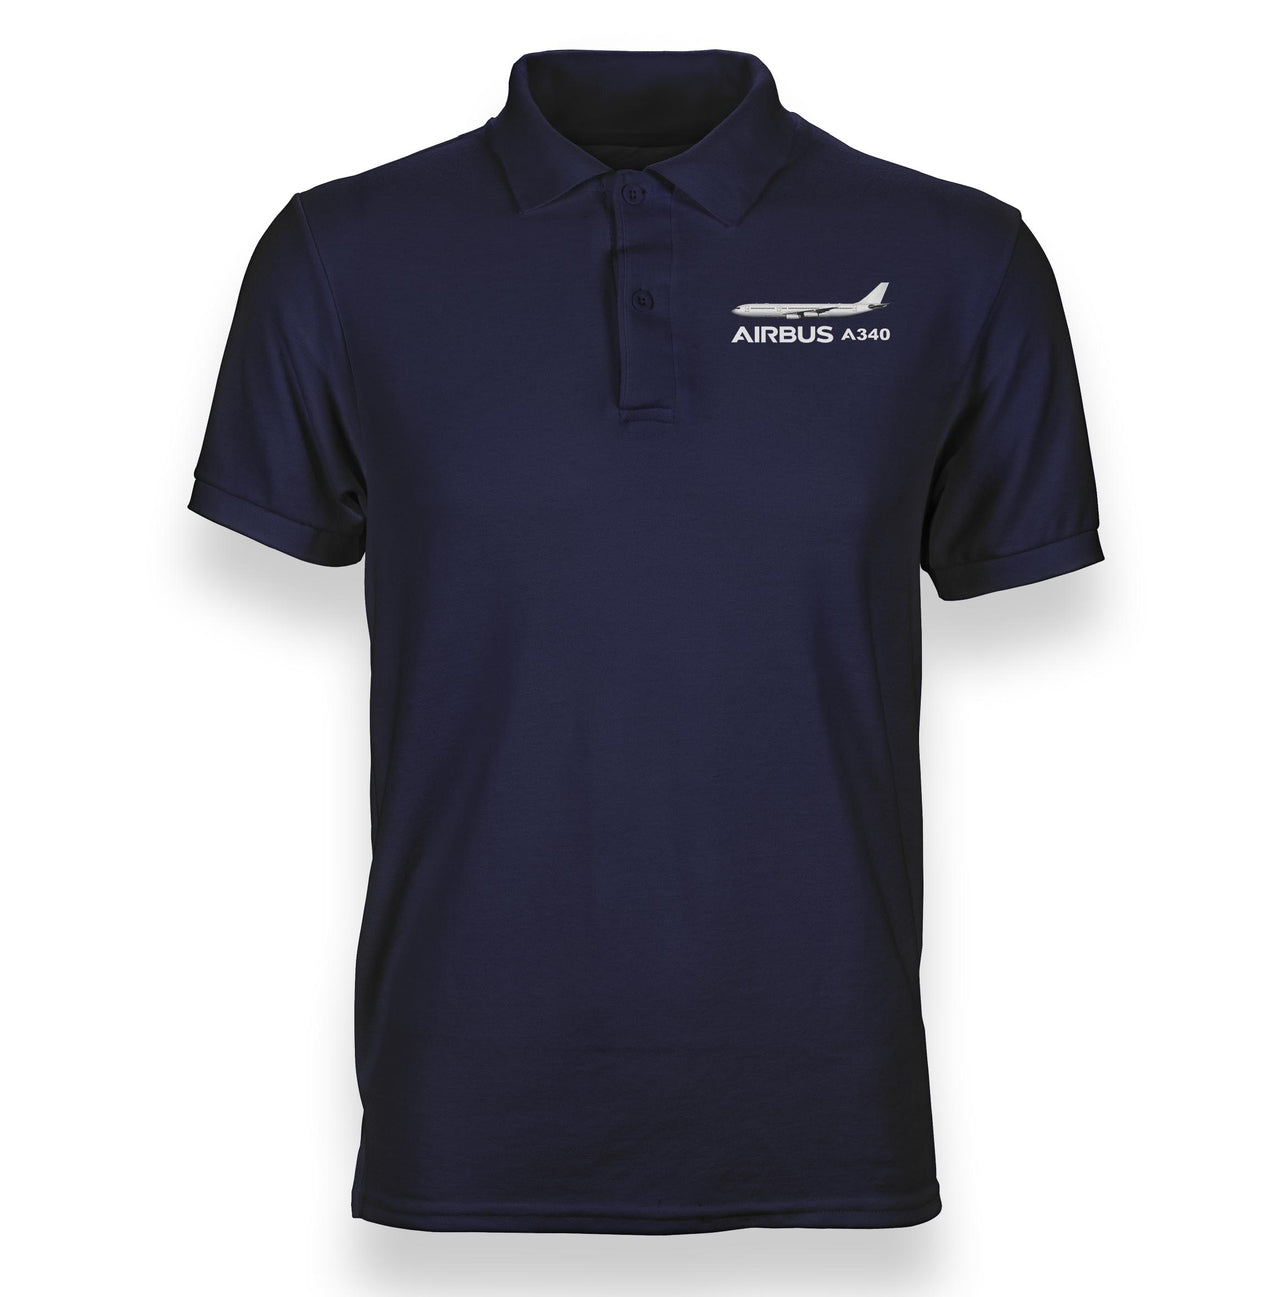 The Airbus A340 Designed Polo T-Shirts